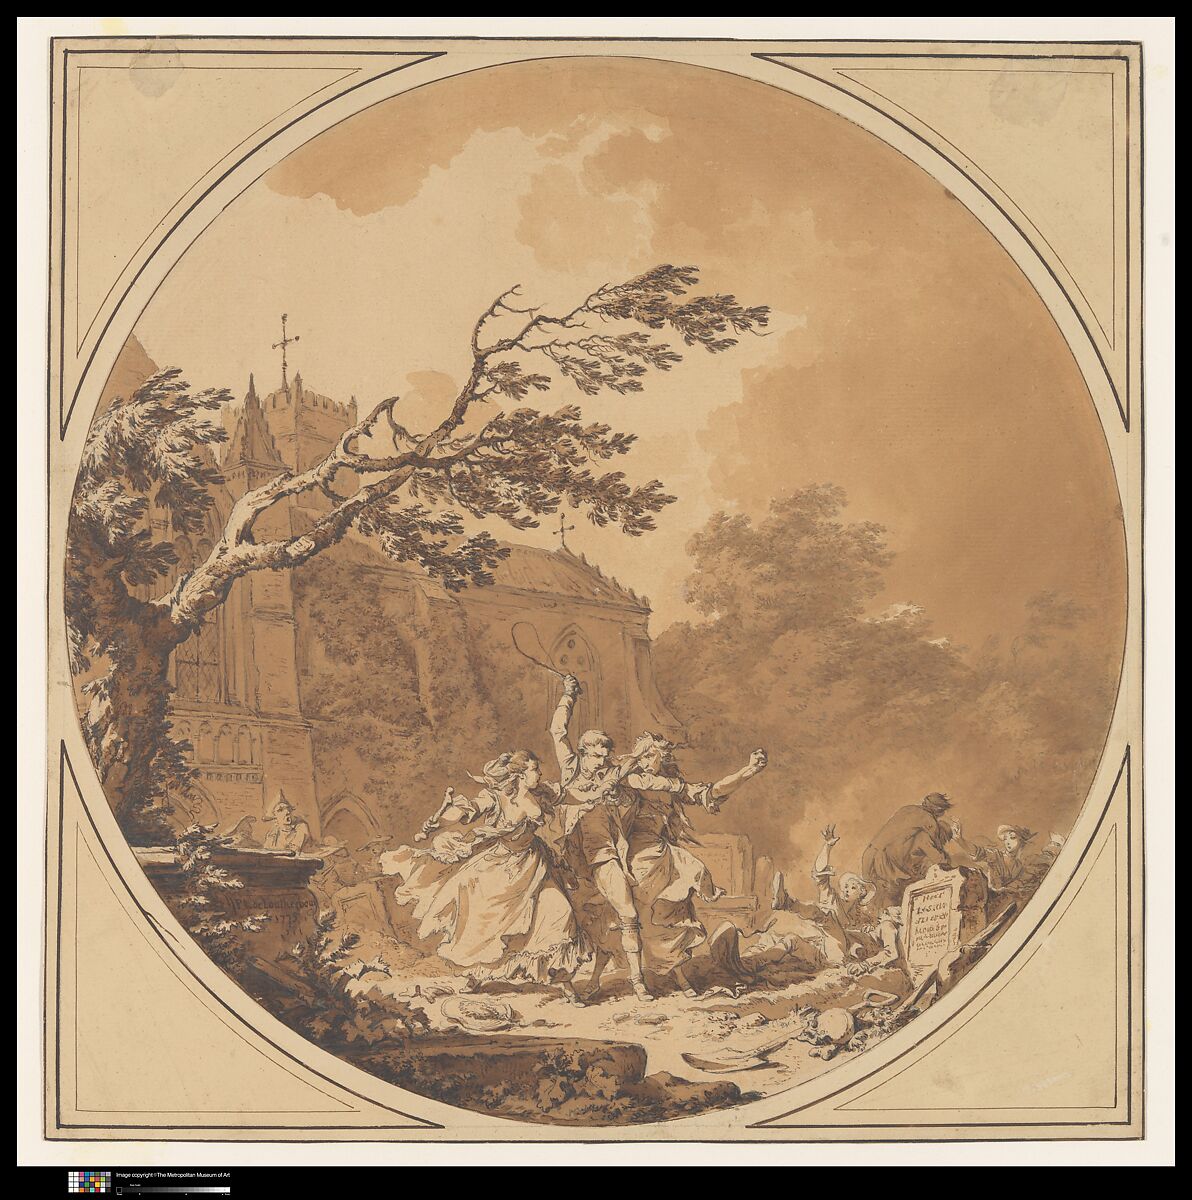 Tom Jones Assisting Molly Seagrim in the Churchyard, Philippe Jacques de Loutherbourg (French, Strasbourg 1740–1812 London), Pen and brown ink, brush and brown wash, over black chalk underdrawing 